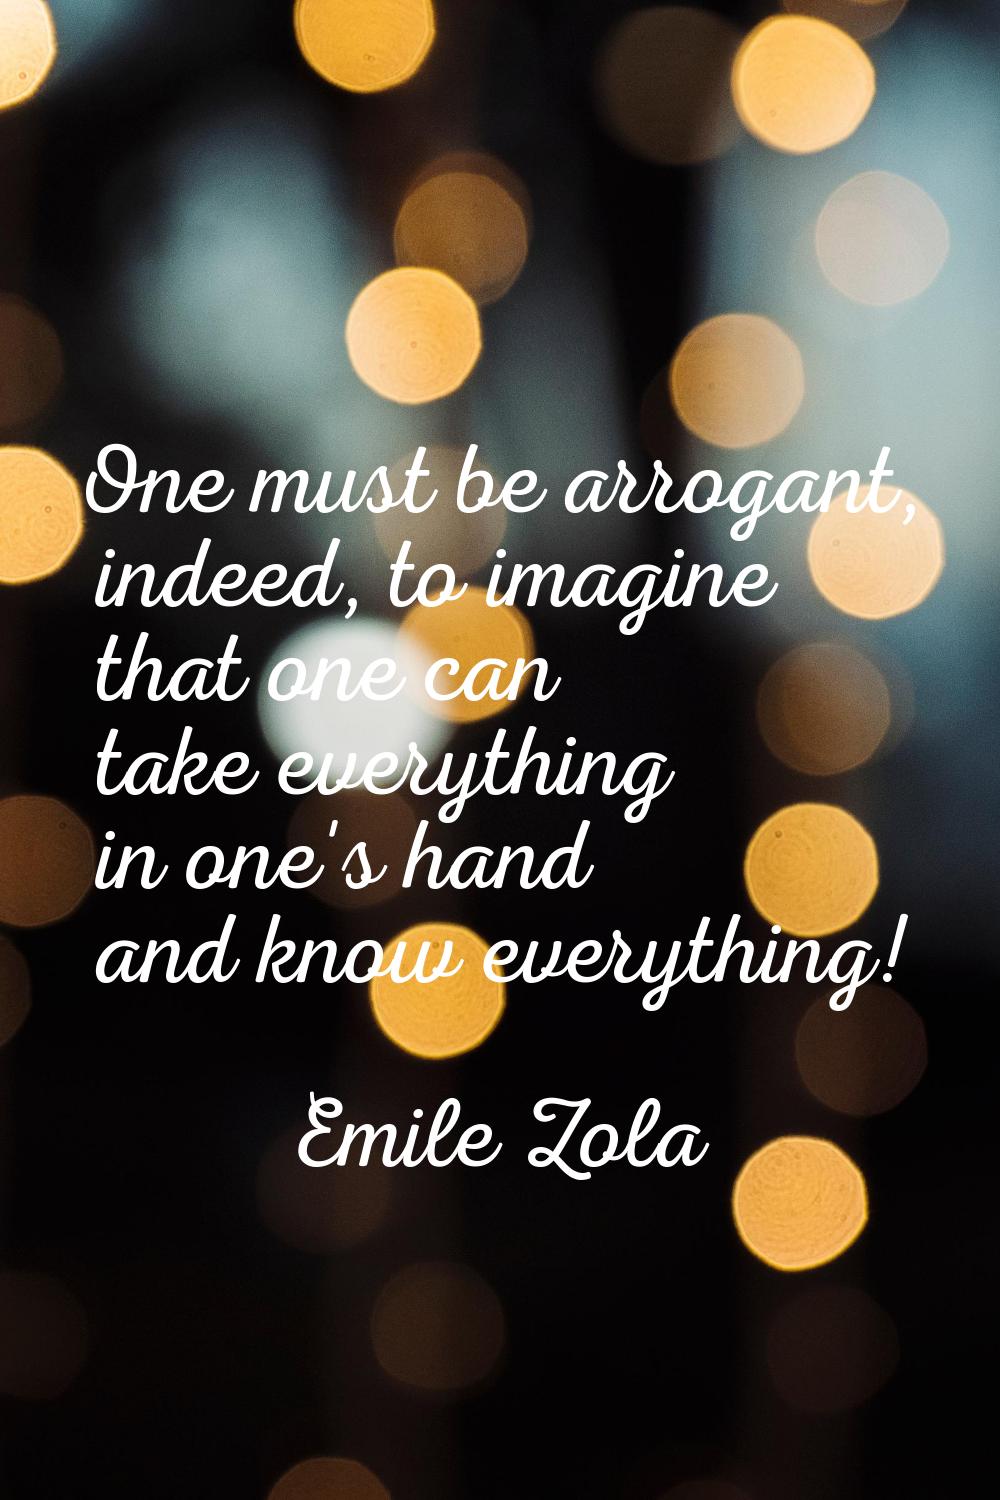 One must be arrogant, indeed, to imagine that one can take everything in one's hand and know everyt